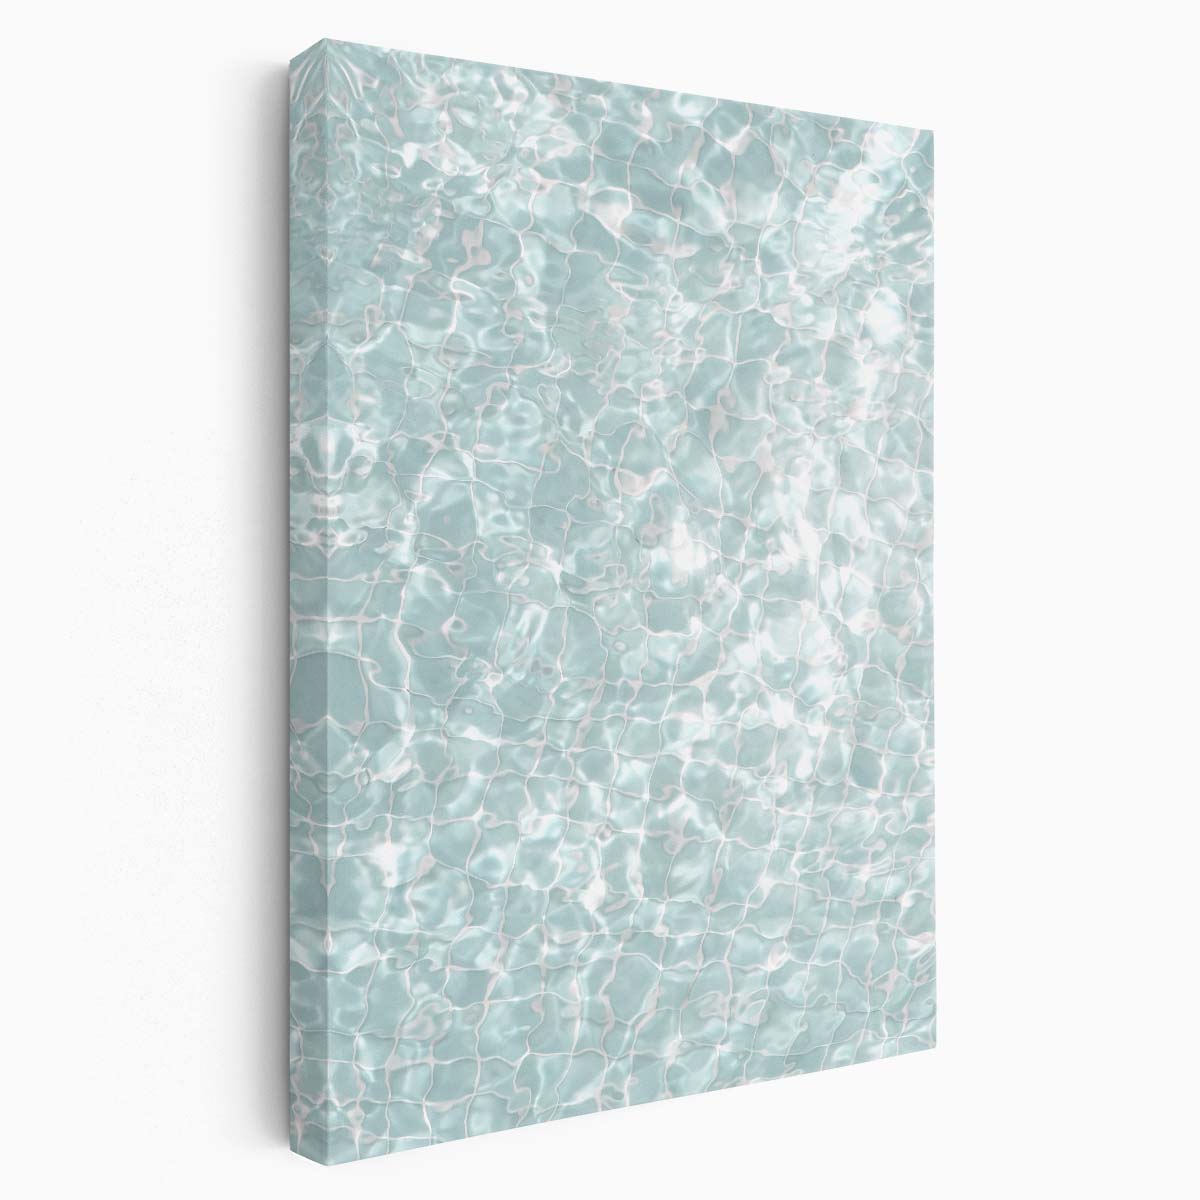 Abstract Swimming Pool Reflection Photography - Graphic Water Pattern Art by Luxuriance Designs, made in USA